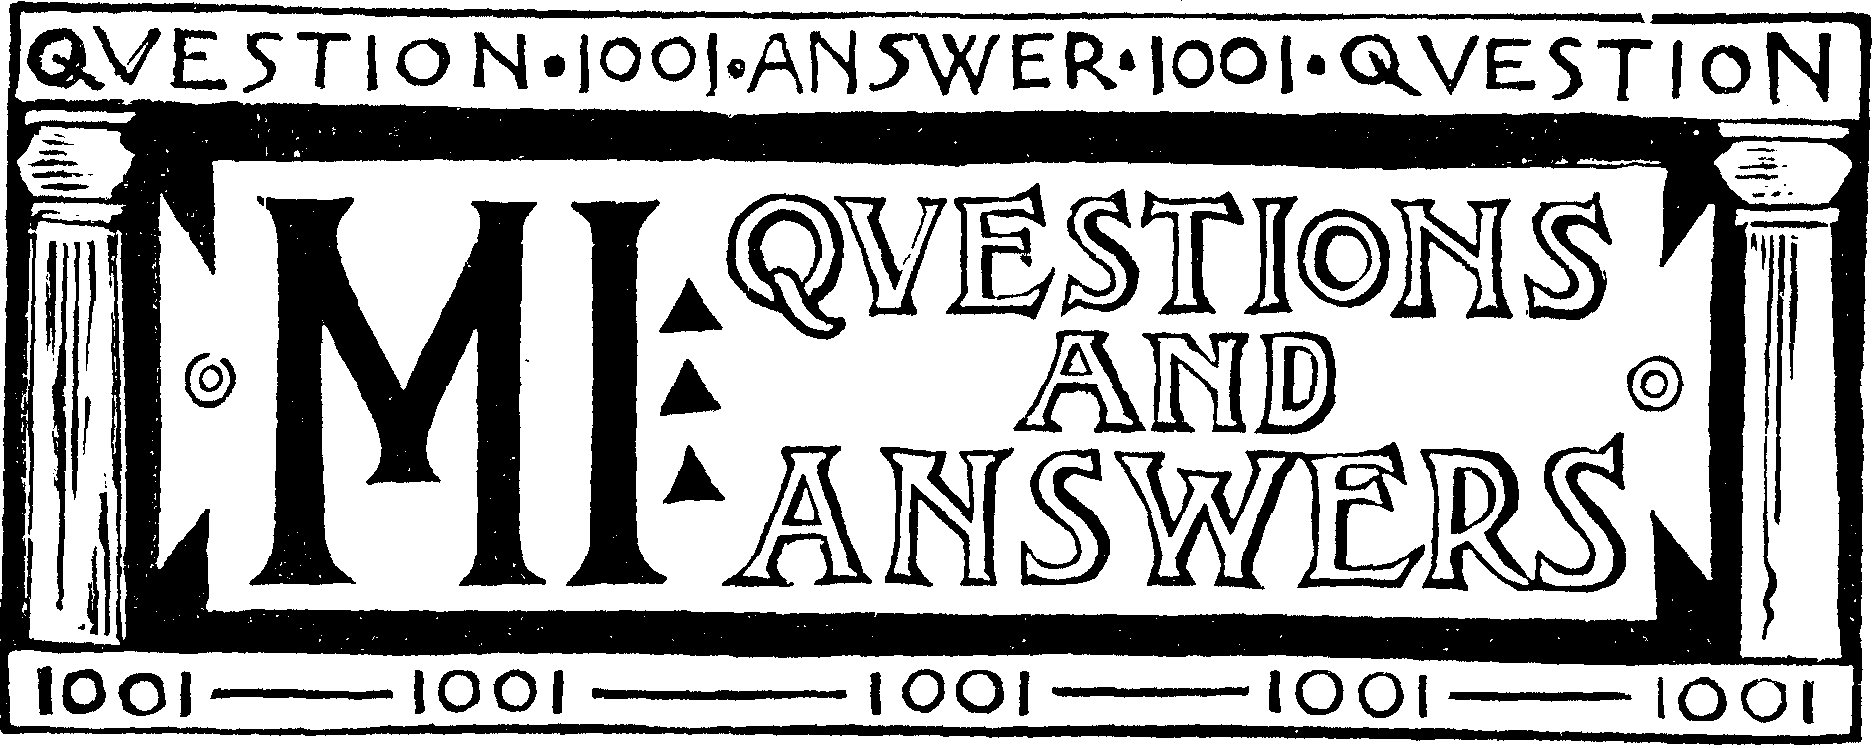 1001 Questions And Answers On Orthography And Reading